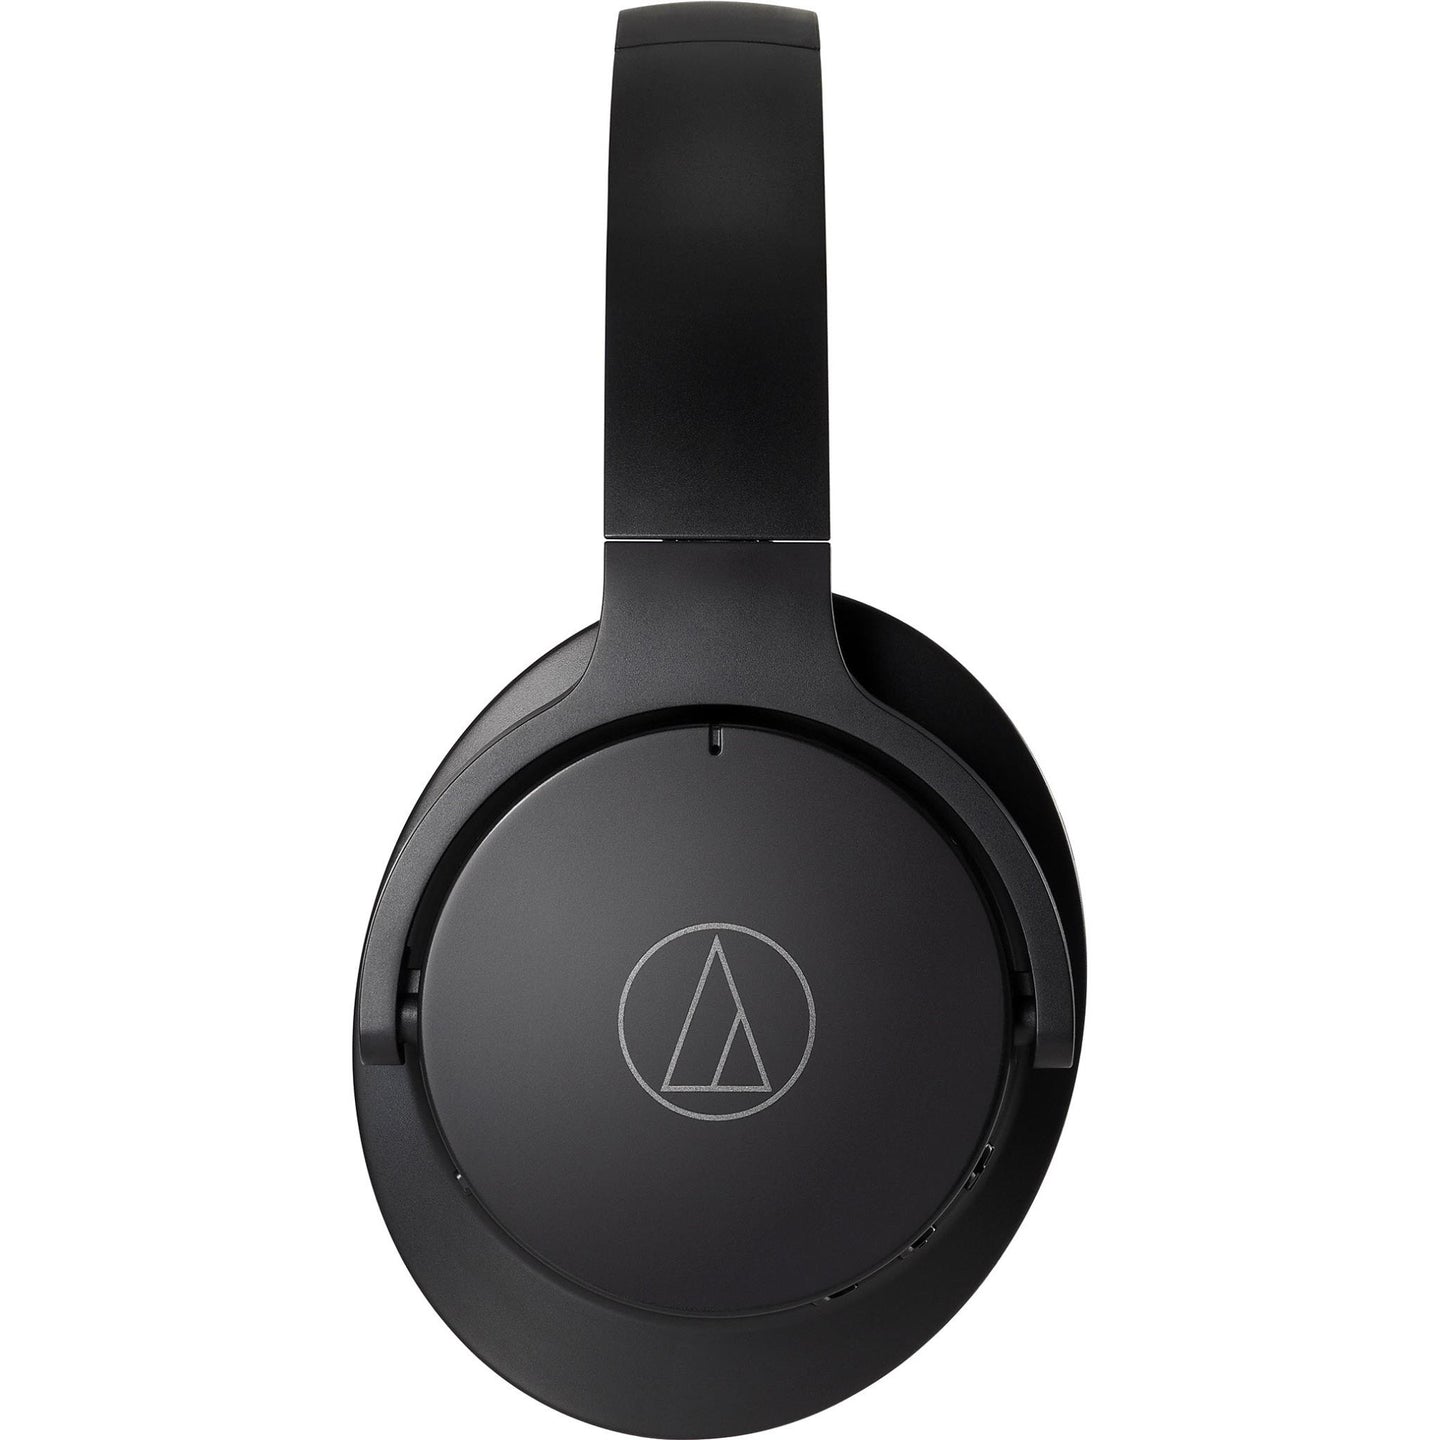 Audio-Technical Over-Ear Wireless Noise Cancelling Headphones (Black)